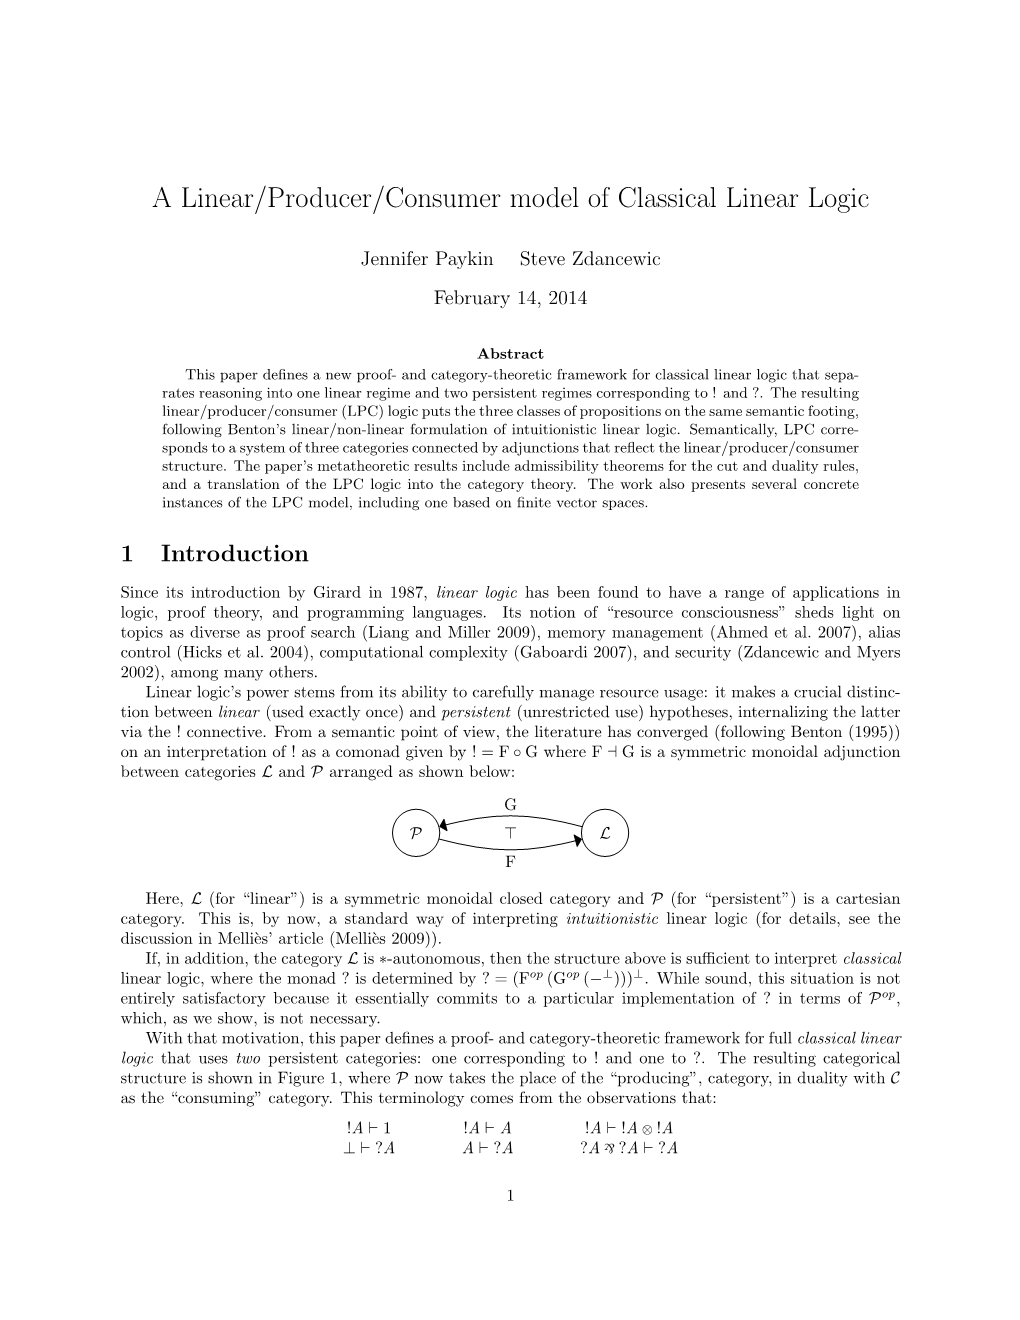 A Linear/Producer/Consumer Model of Classical Linear Logic